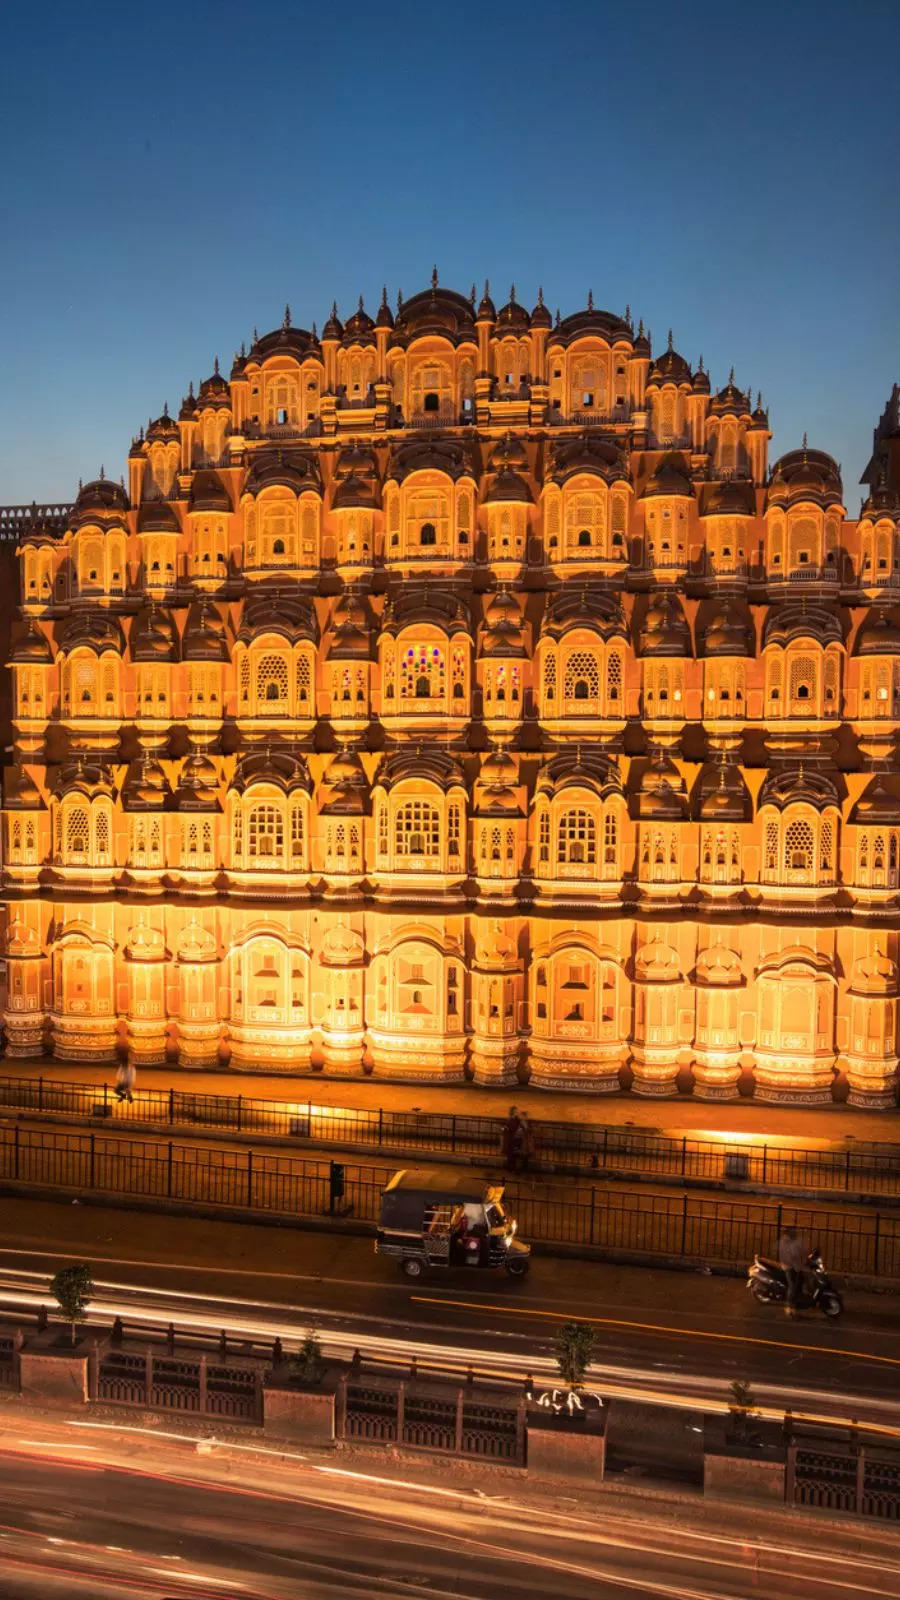 Known as the Pink City, Jaipur is famous for its historical forts and palaces, including the majestic Amber Fort, City Palace, Hawa Mahal, and Jantar Mantar.